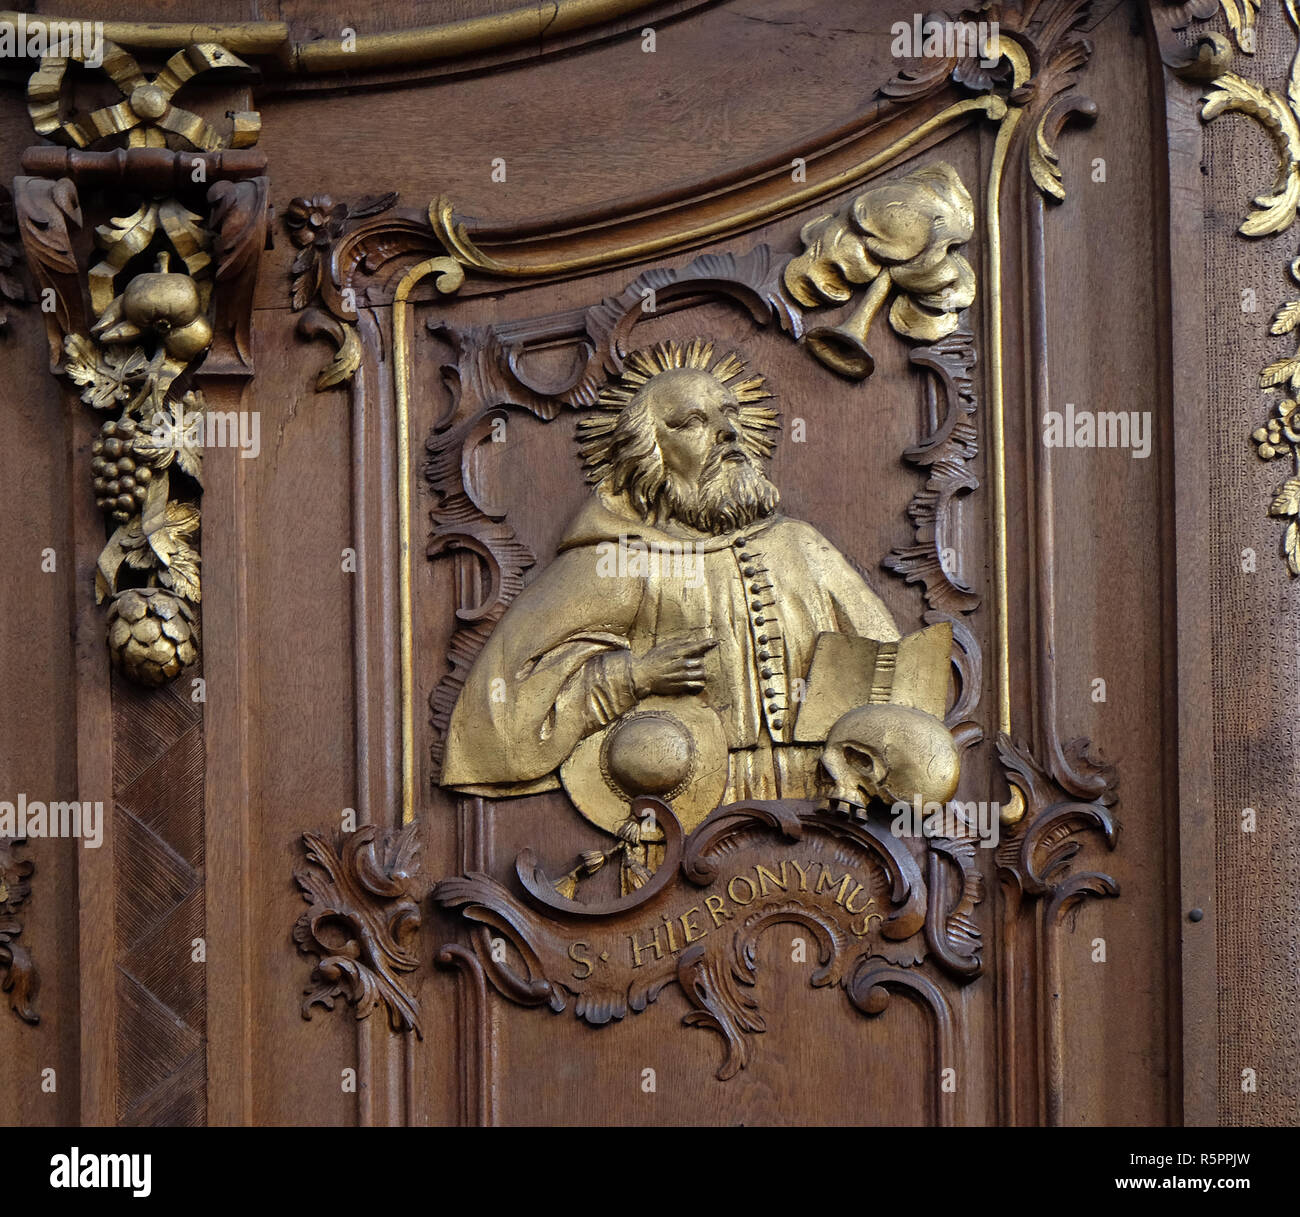 Saint Jerome, one of the Latin Fathers of the Church, choir stalls by Daniel Aschauer in Cistercian Abbey of Bronbach in Reicholzheim near Wertheim, G Stock Photo